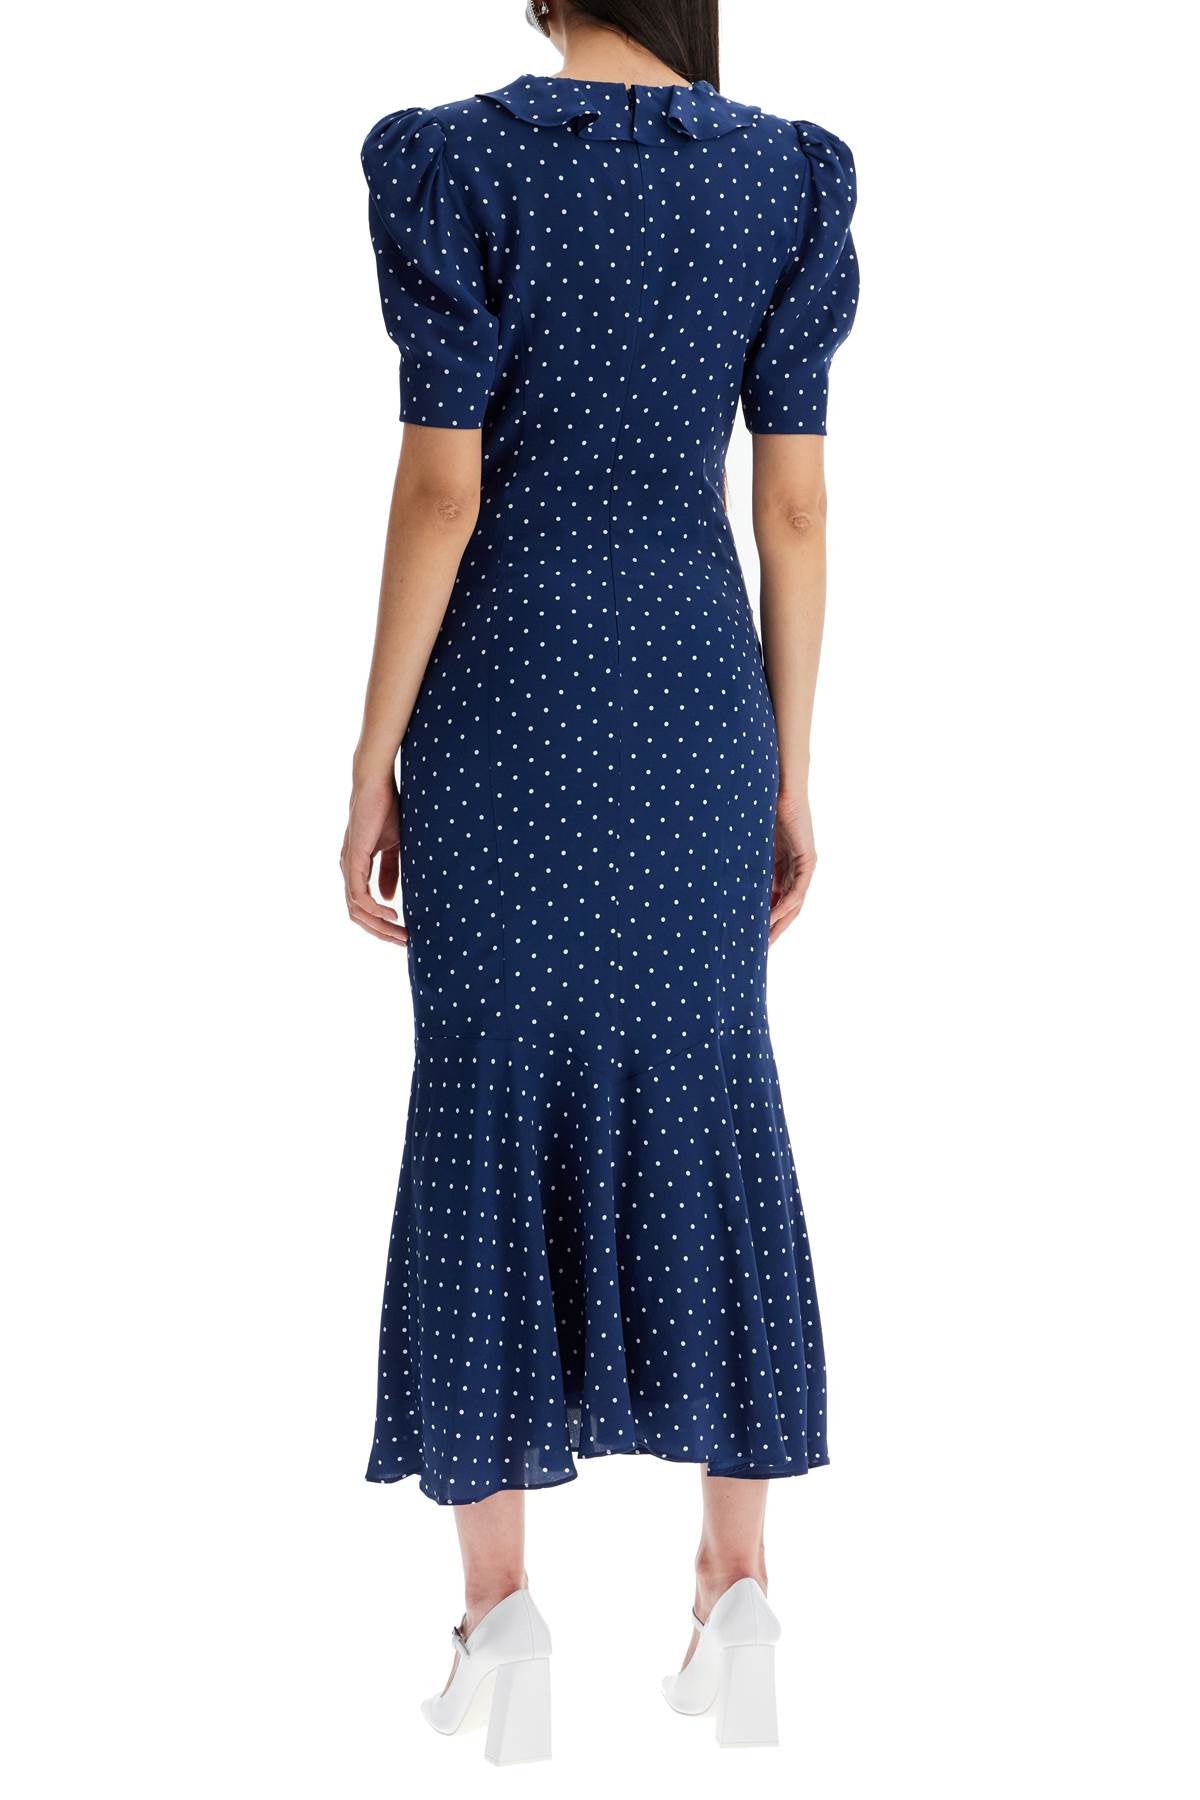 Alessandra Rich "polka Dot Silk Midi Dressreplace With Double Quote   Blue